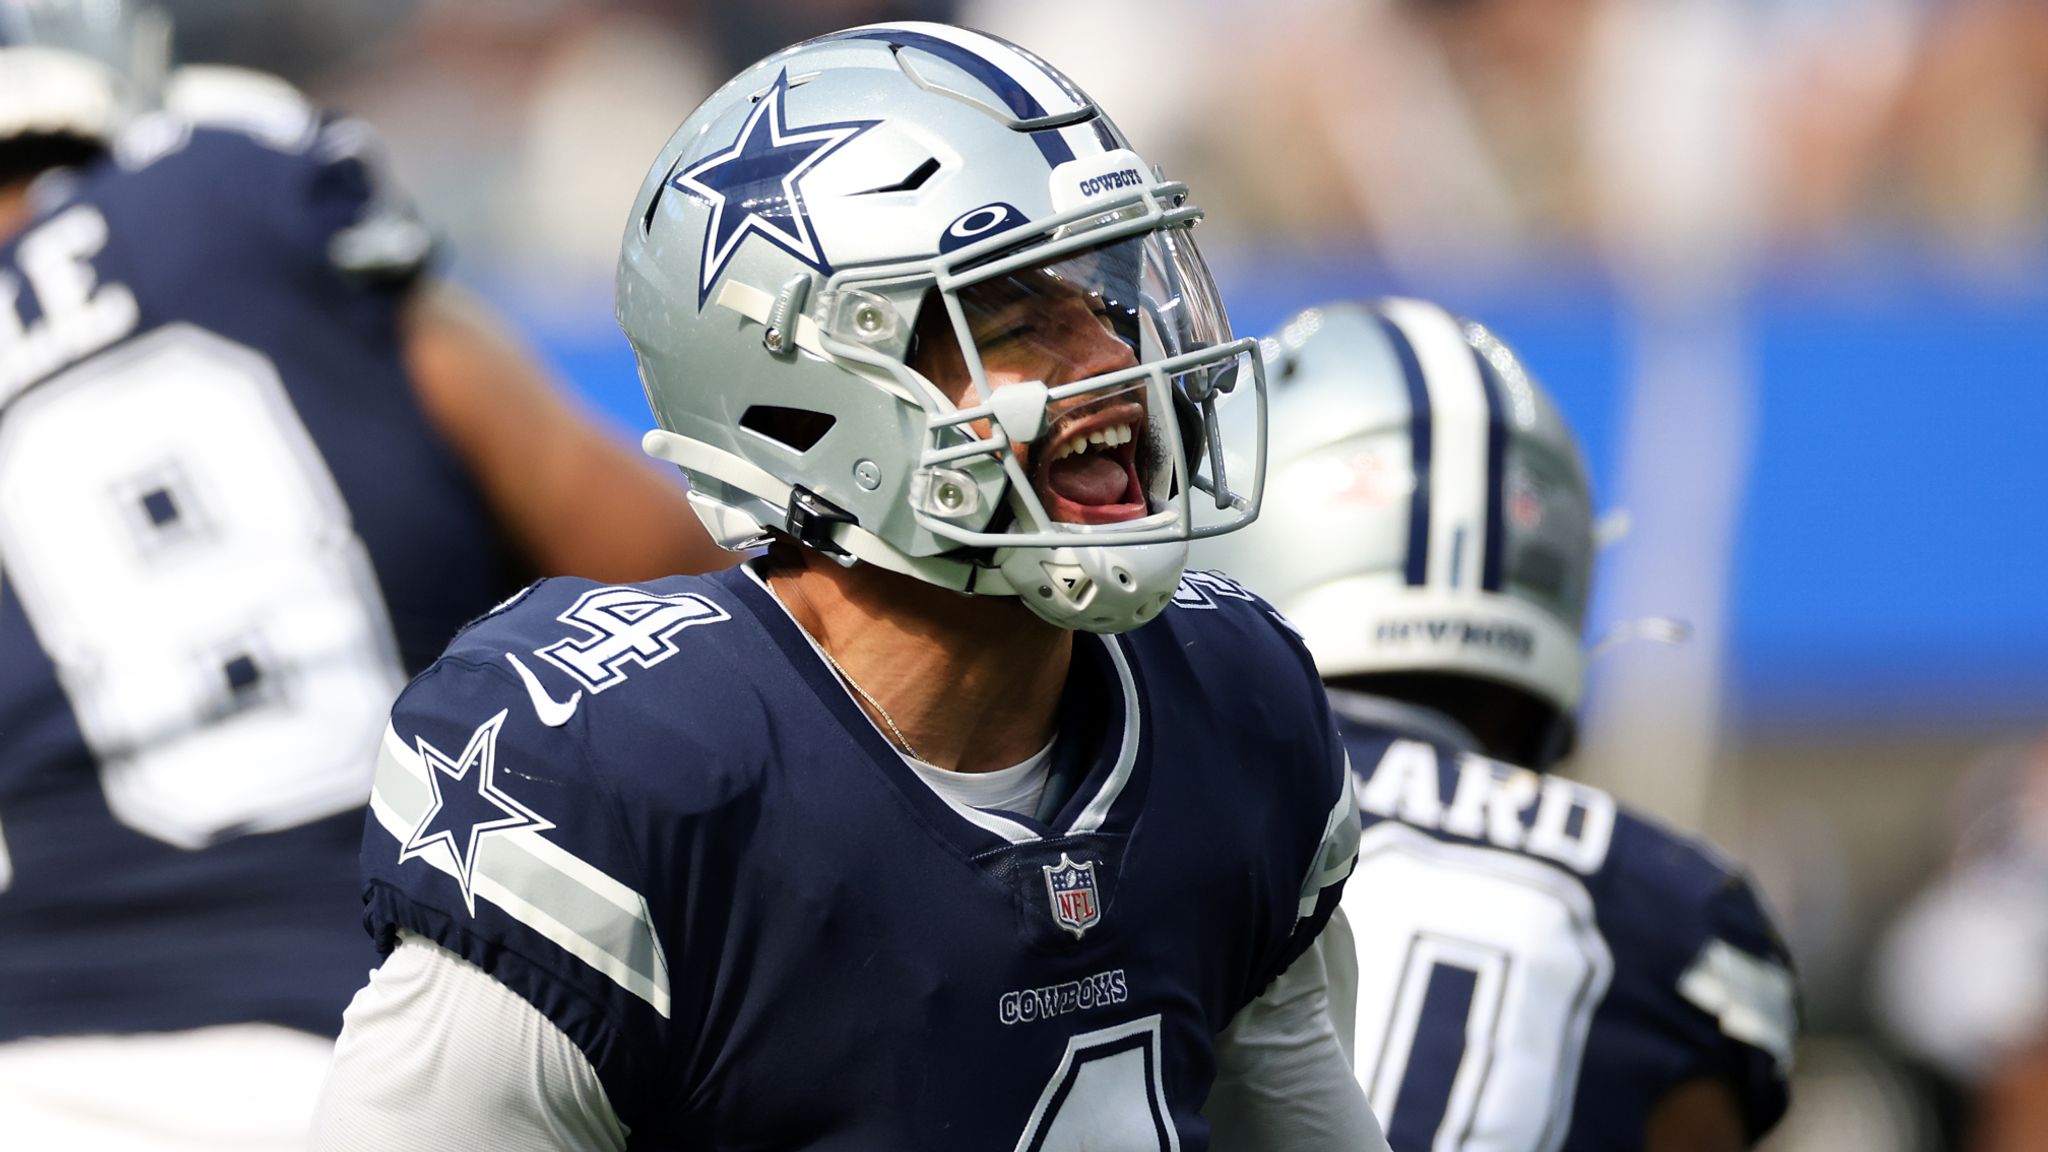 Dallas Cowboys win on last-second field goal against Chargers